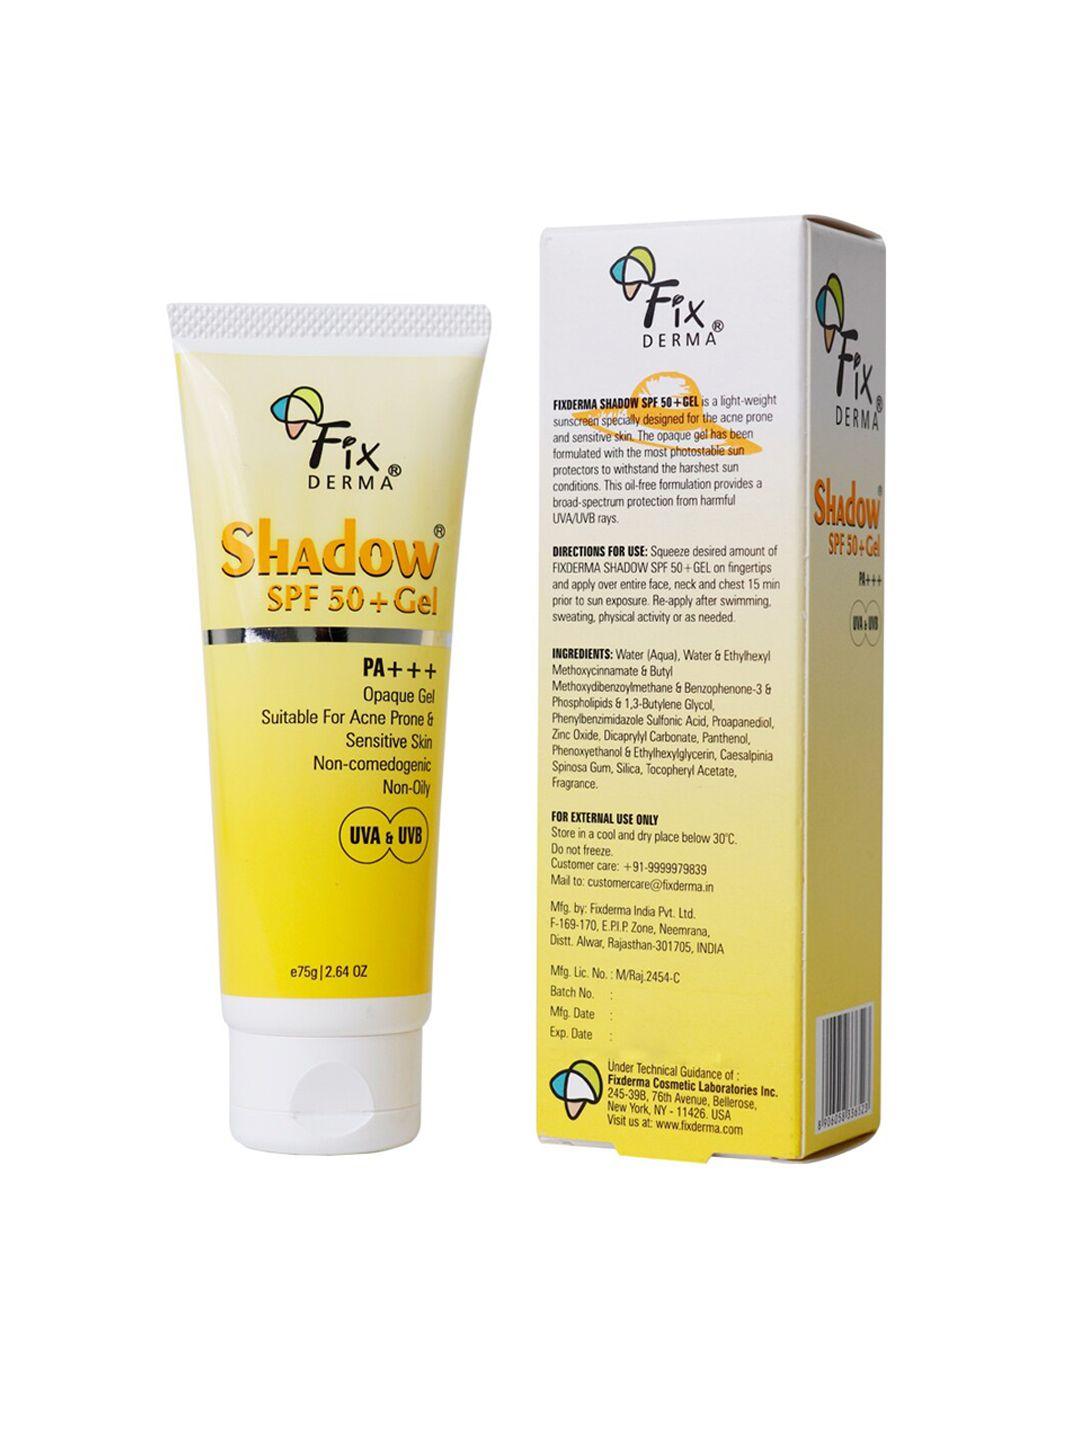 fixderma shadow sunscreen spf 50+ gel for oily acne prone skin with pa+++ protection - 75g